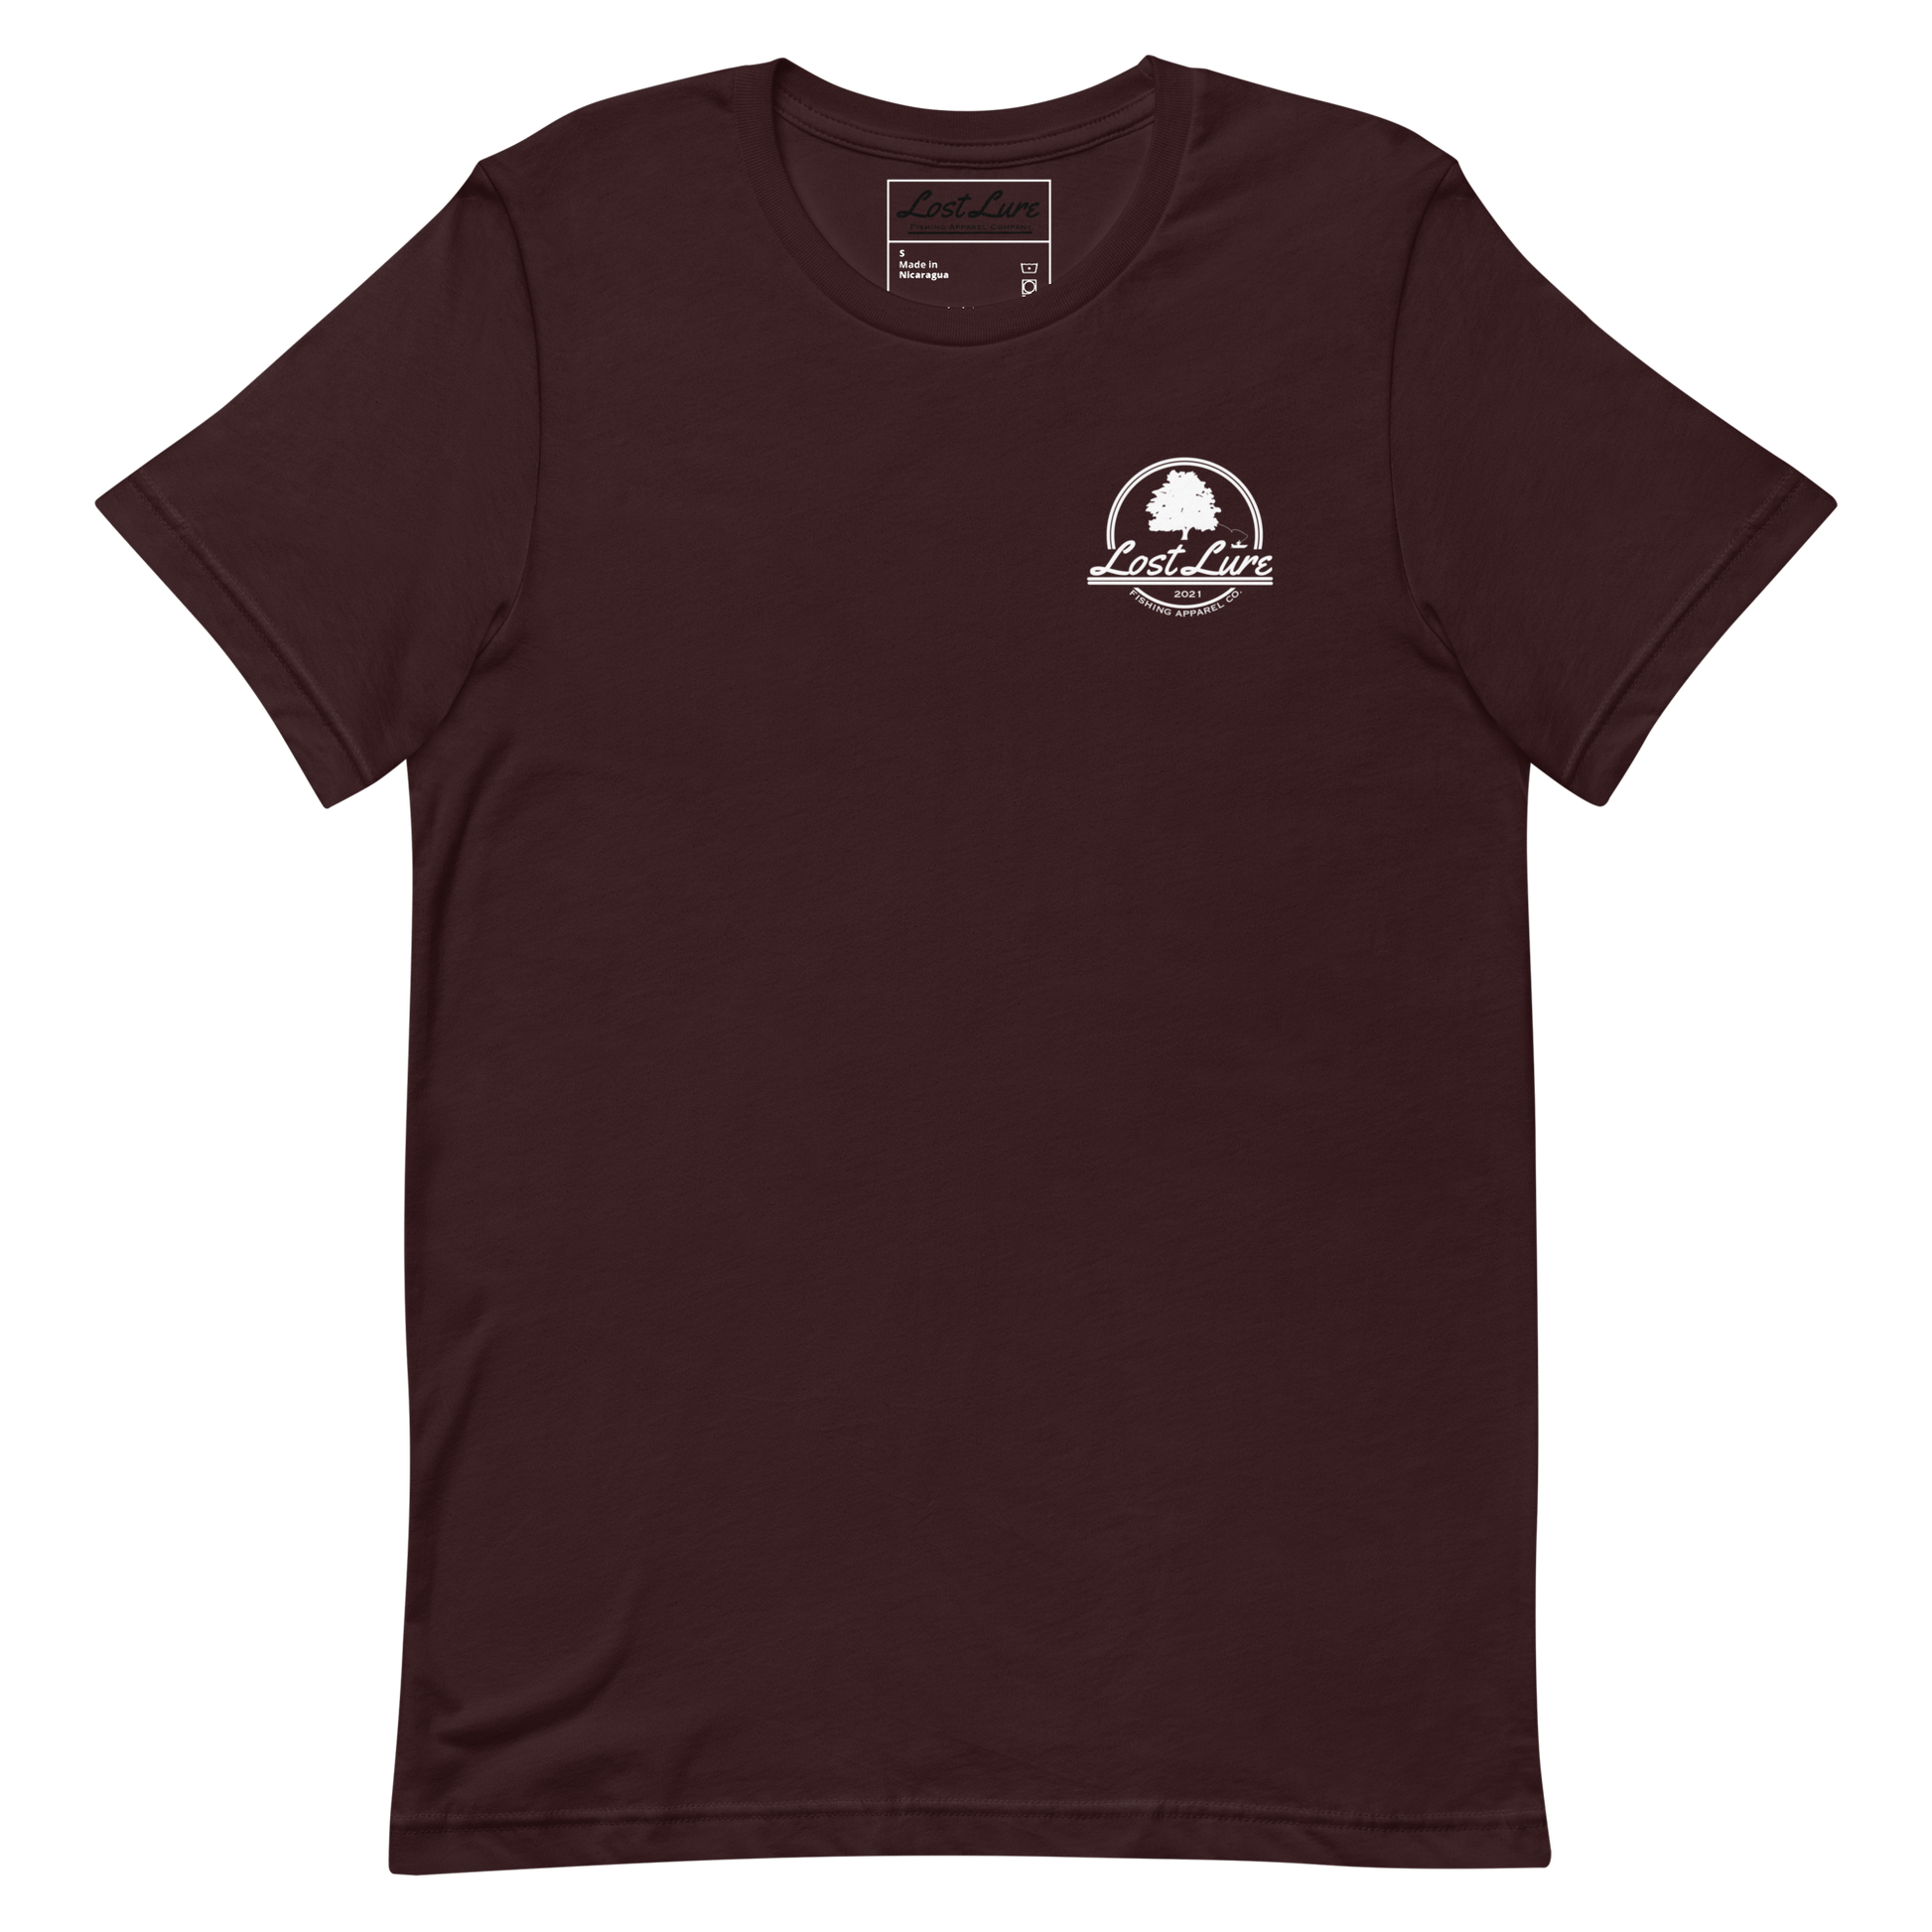 Cutthroat Trout fishing shirt. It’s an American traditional style design with a cutthroat trout and a dagger. The shirt reads Cutthroat trout, est. 2021, lost lure fishing apparel company. The front of the shirt has the lost lure logo. Dark maroon fishing shirt, front side